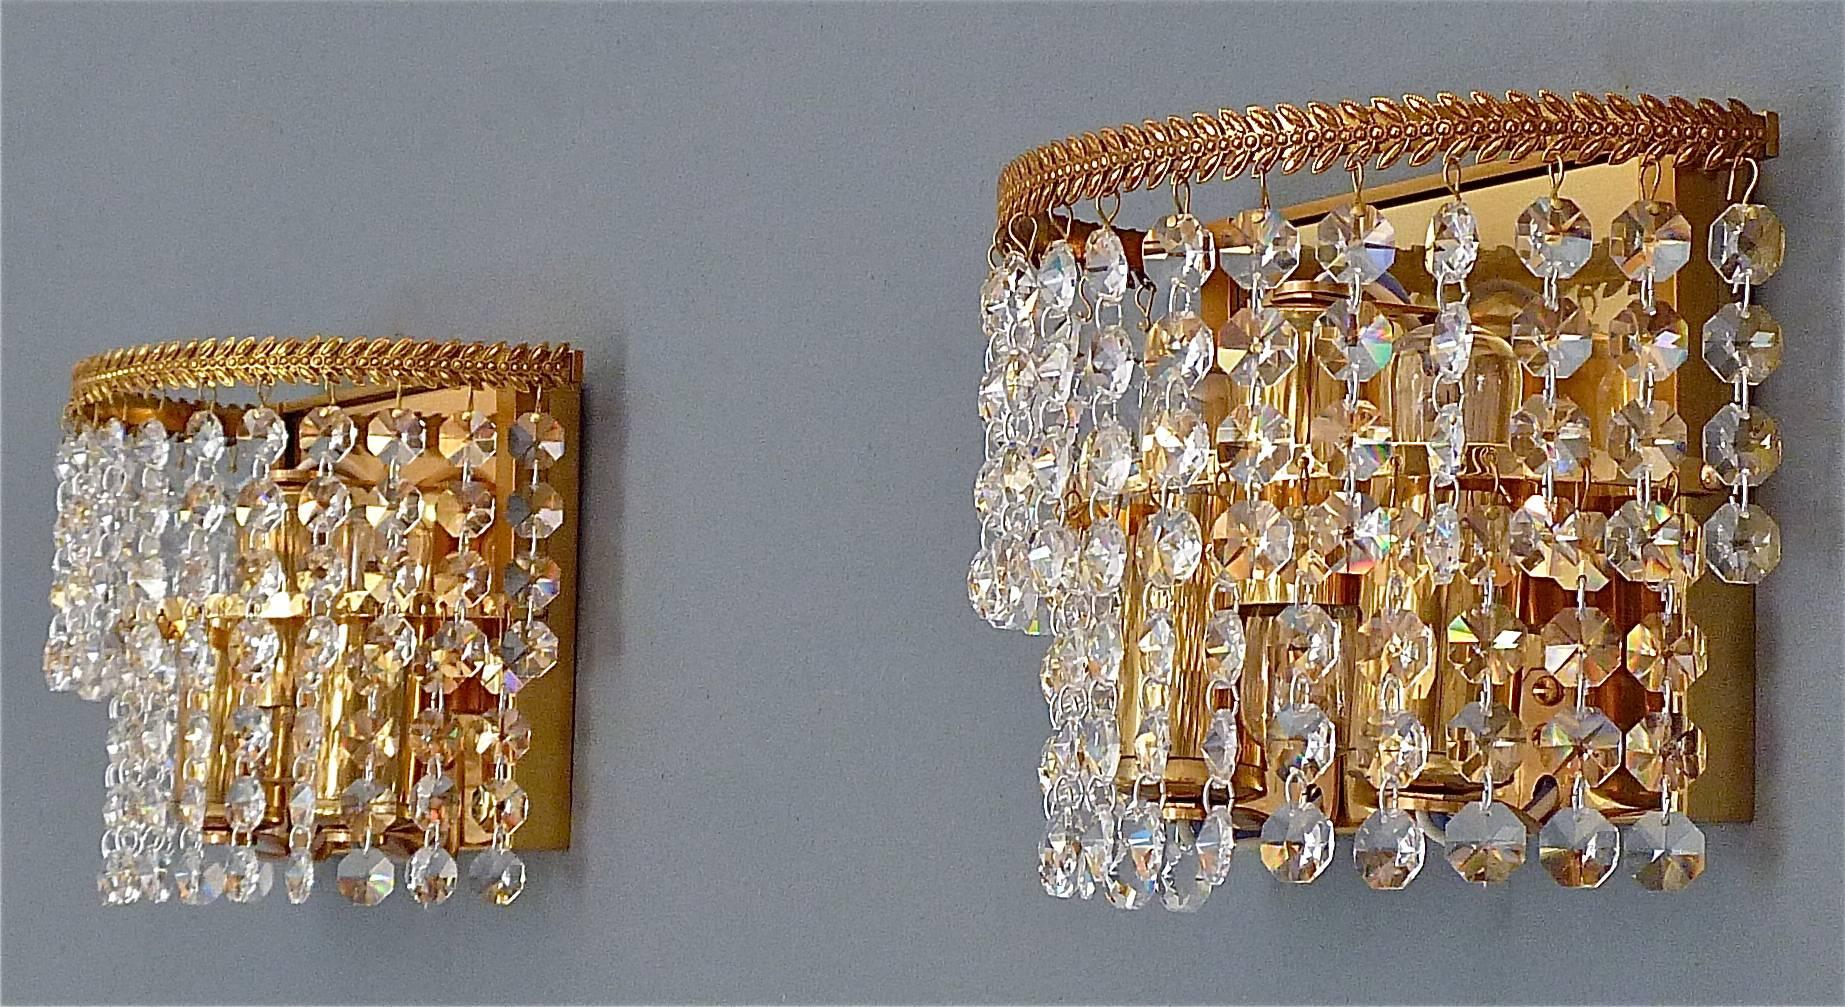 Pair of classical wall lights or sconces by Palwa, Germany circa 1960-1970. They are made of gilt brass and lots of sparkling faceted glass crystals with a classical leaf application to the rim. The elegant and chic model is typical for Palwa,